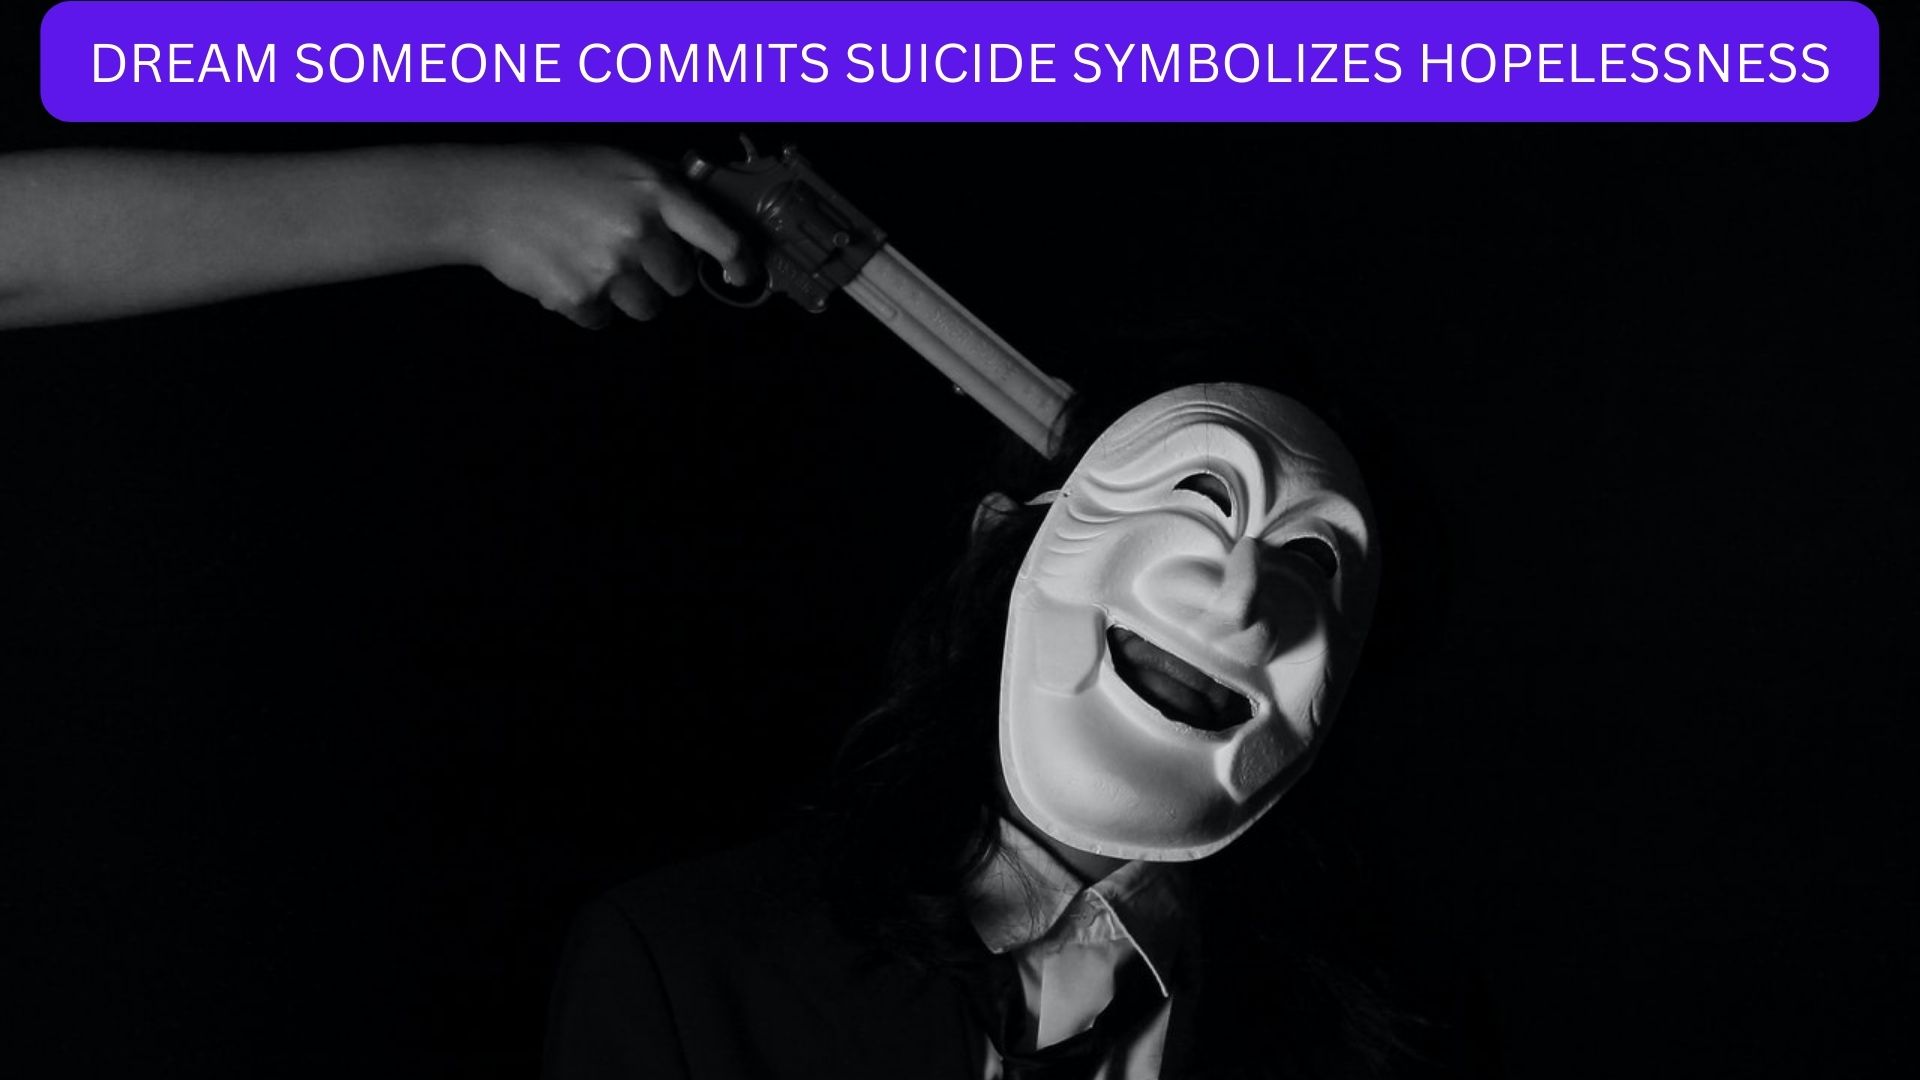 Dream Someone Commits Suicide - Hopelessness